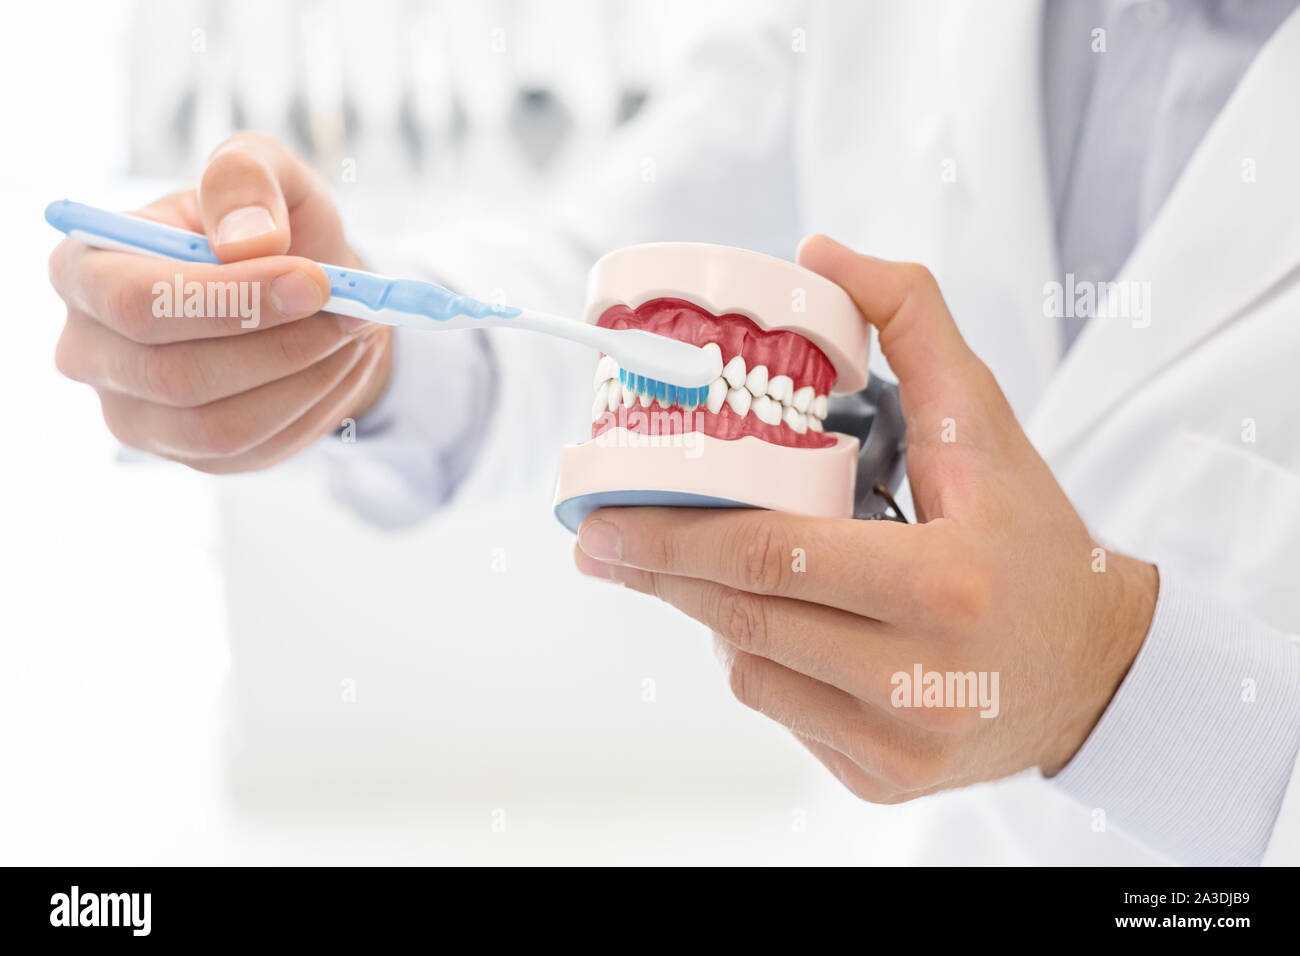 Doctor showing how to brush teeth using jaw model Stock Photo